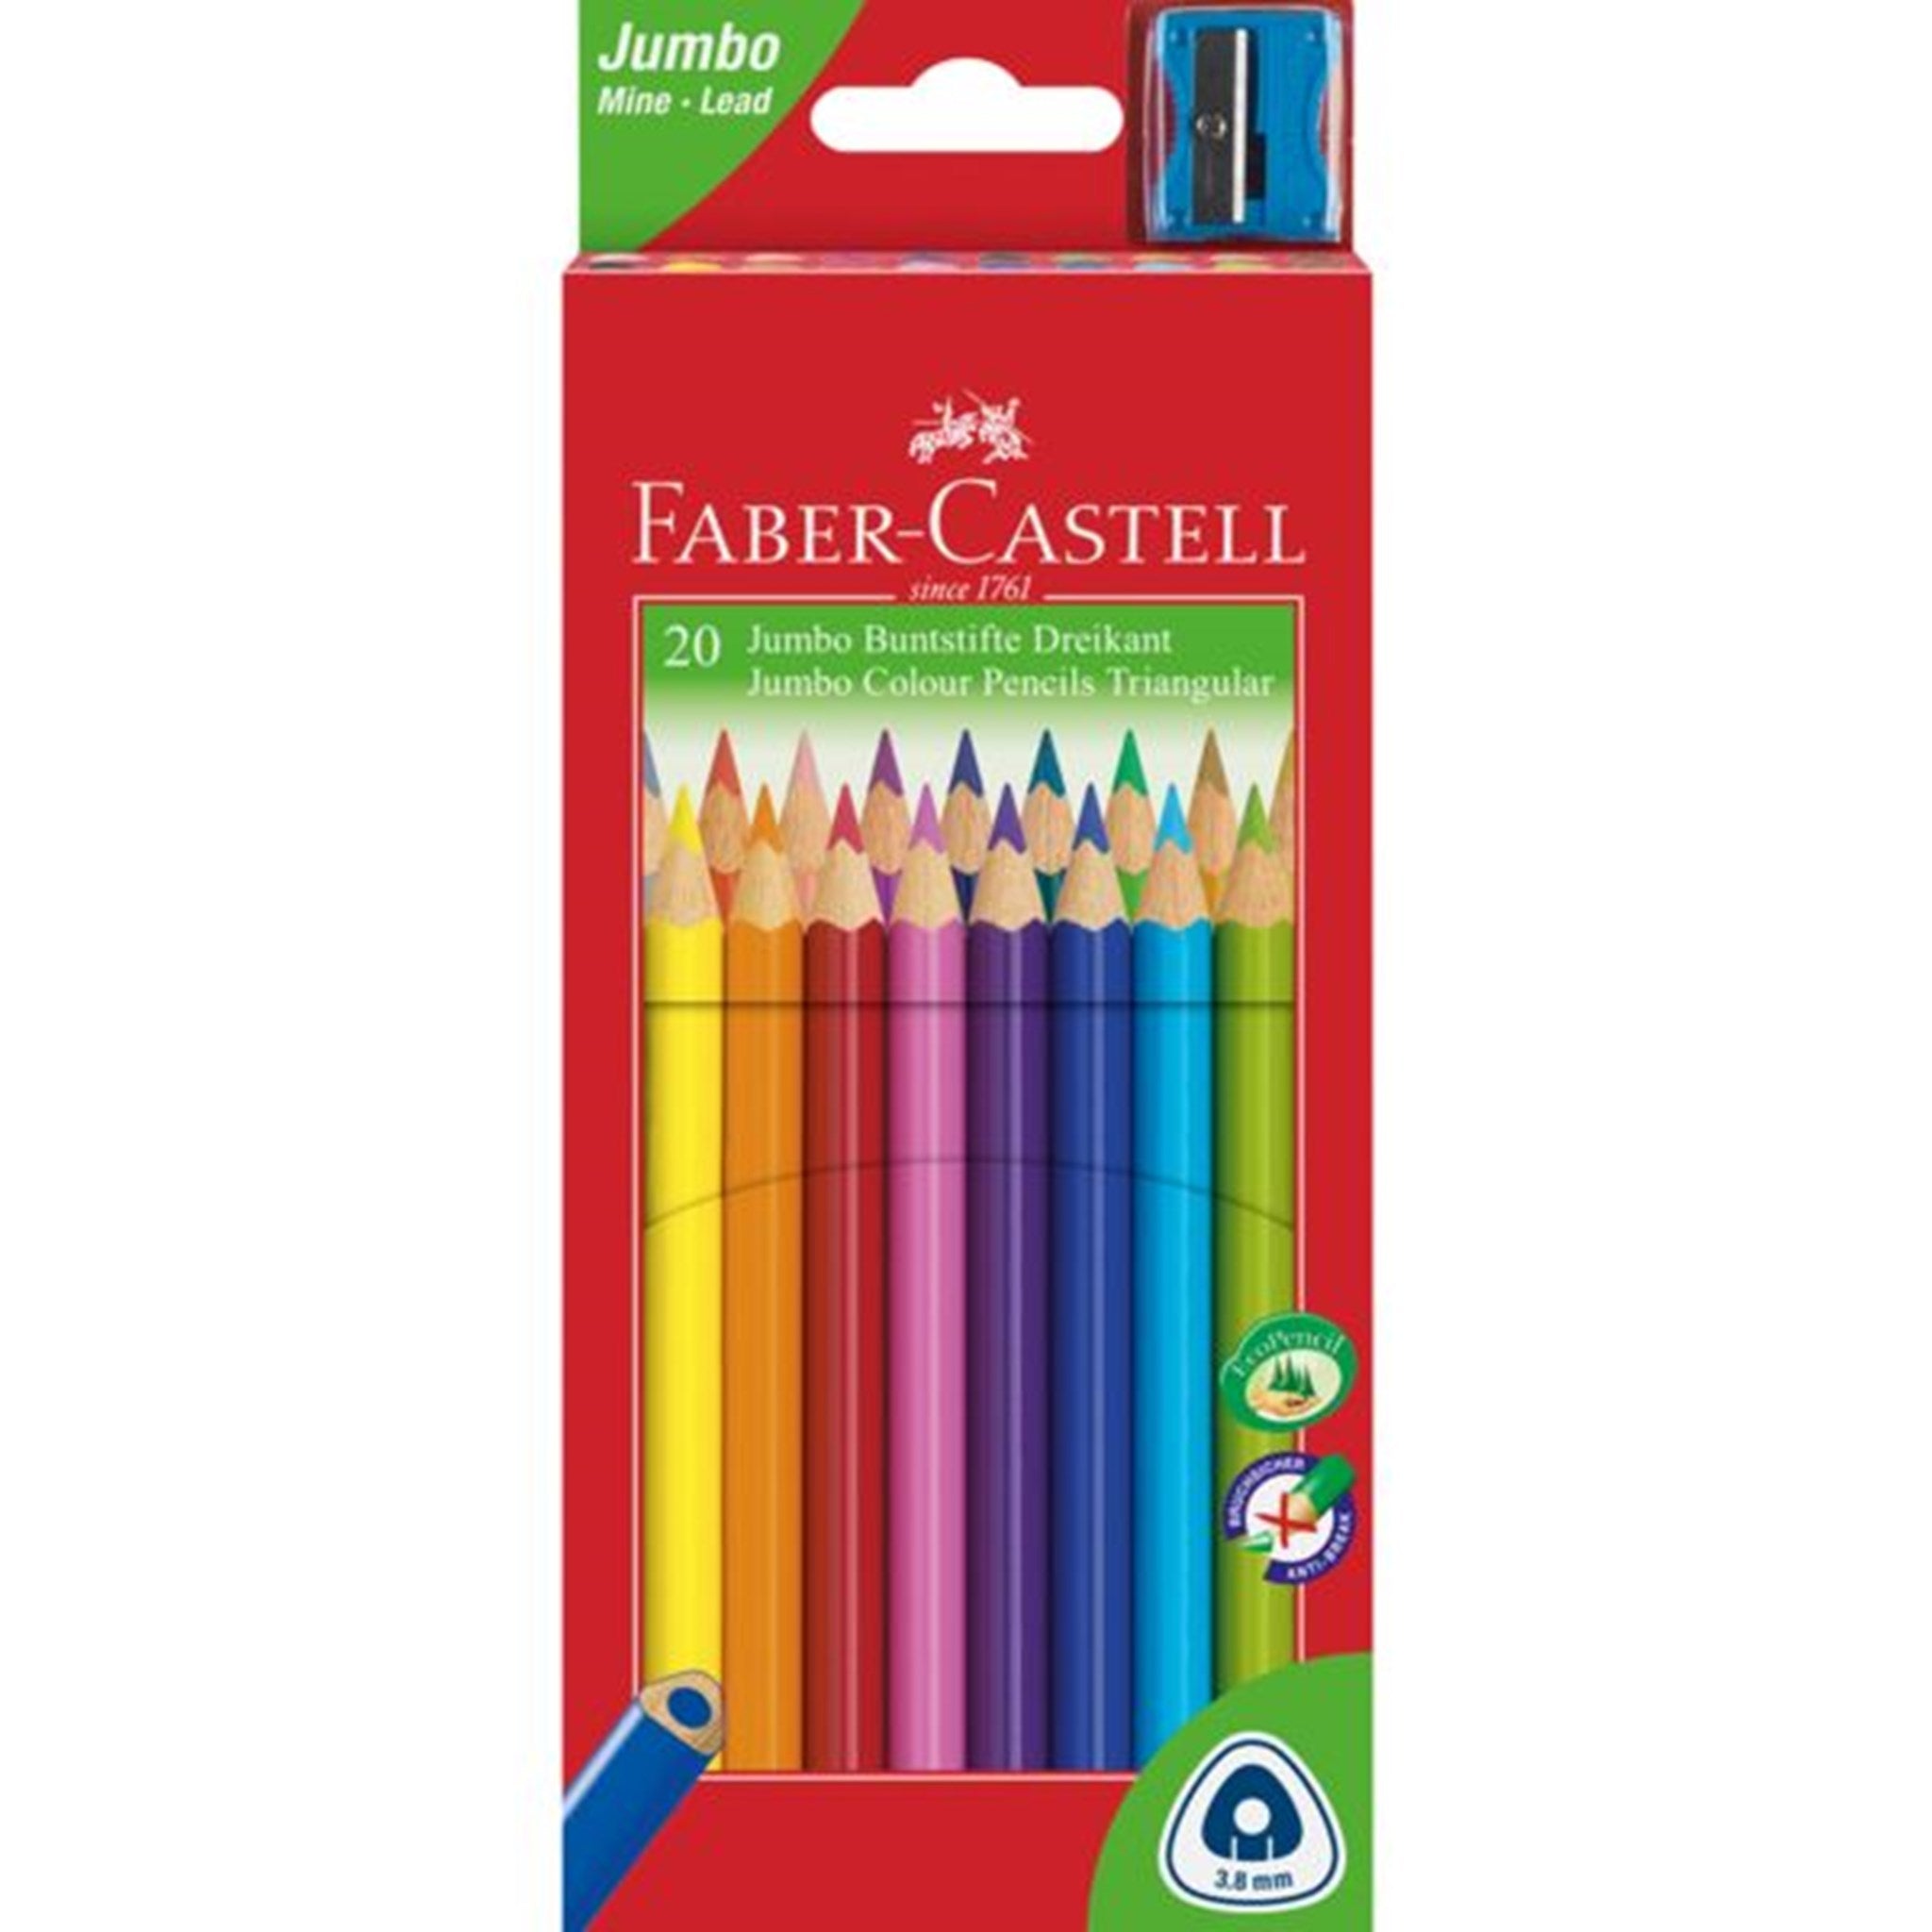 Faber Castell Jumbo 20 Thick Colour Pencils